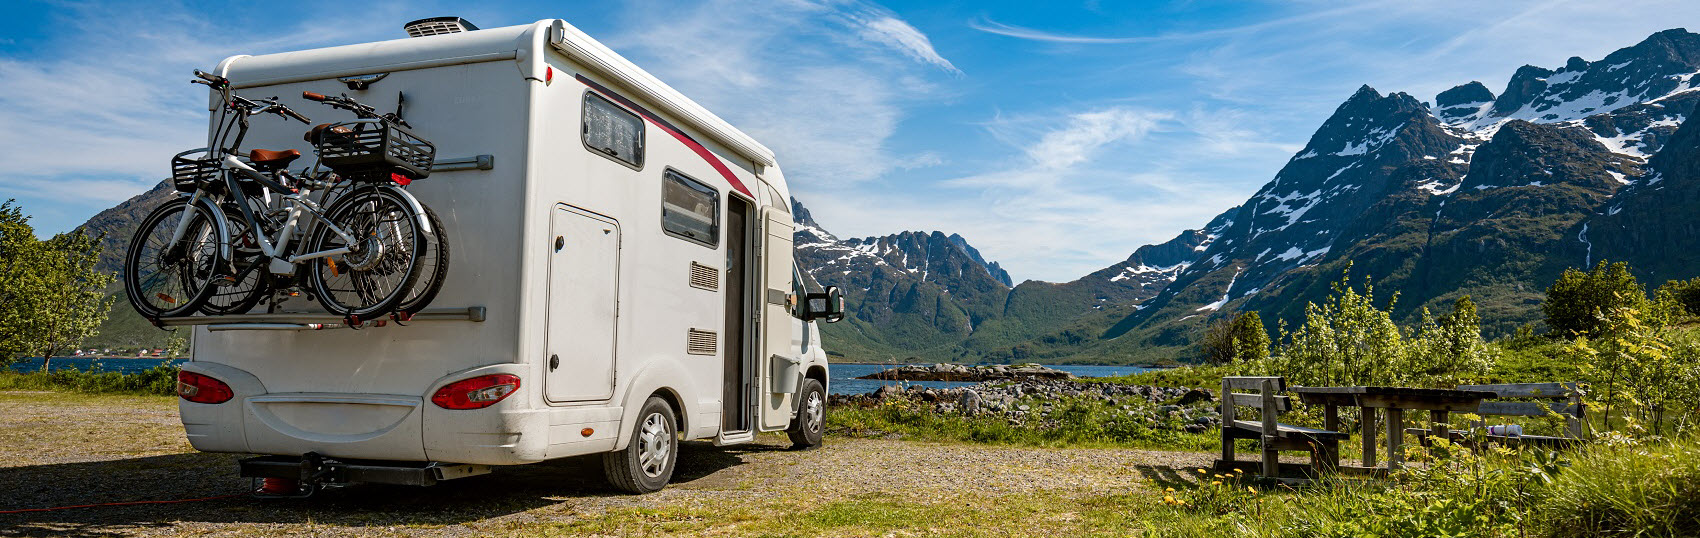 Best Places to RV